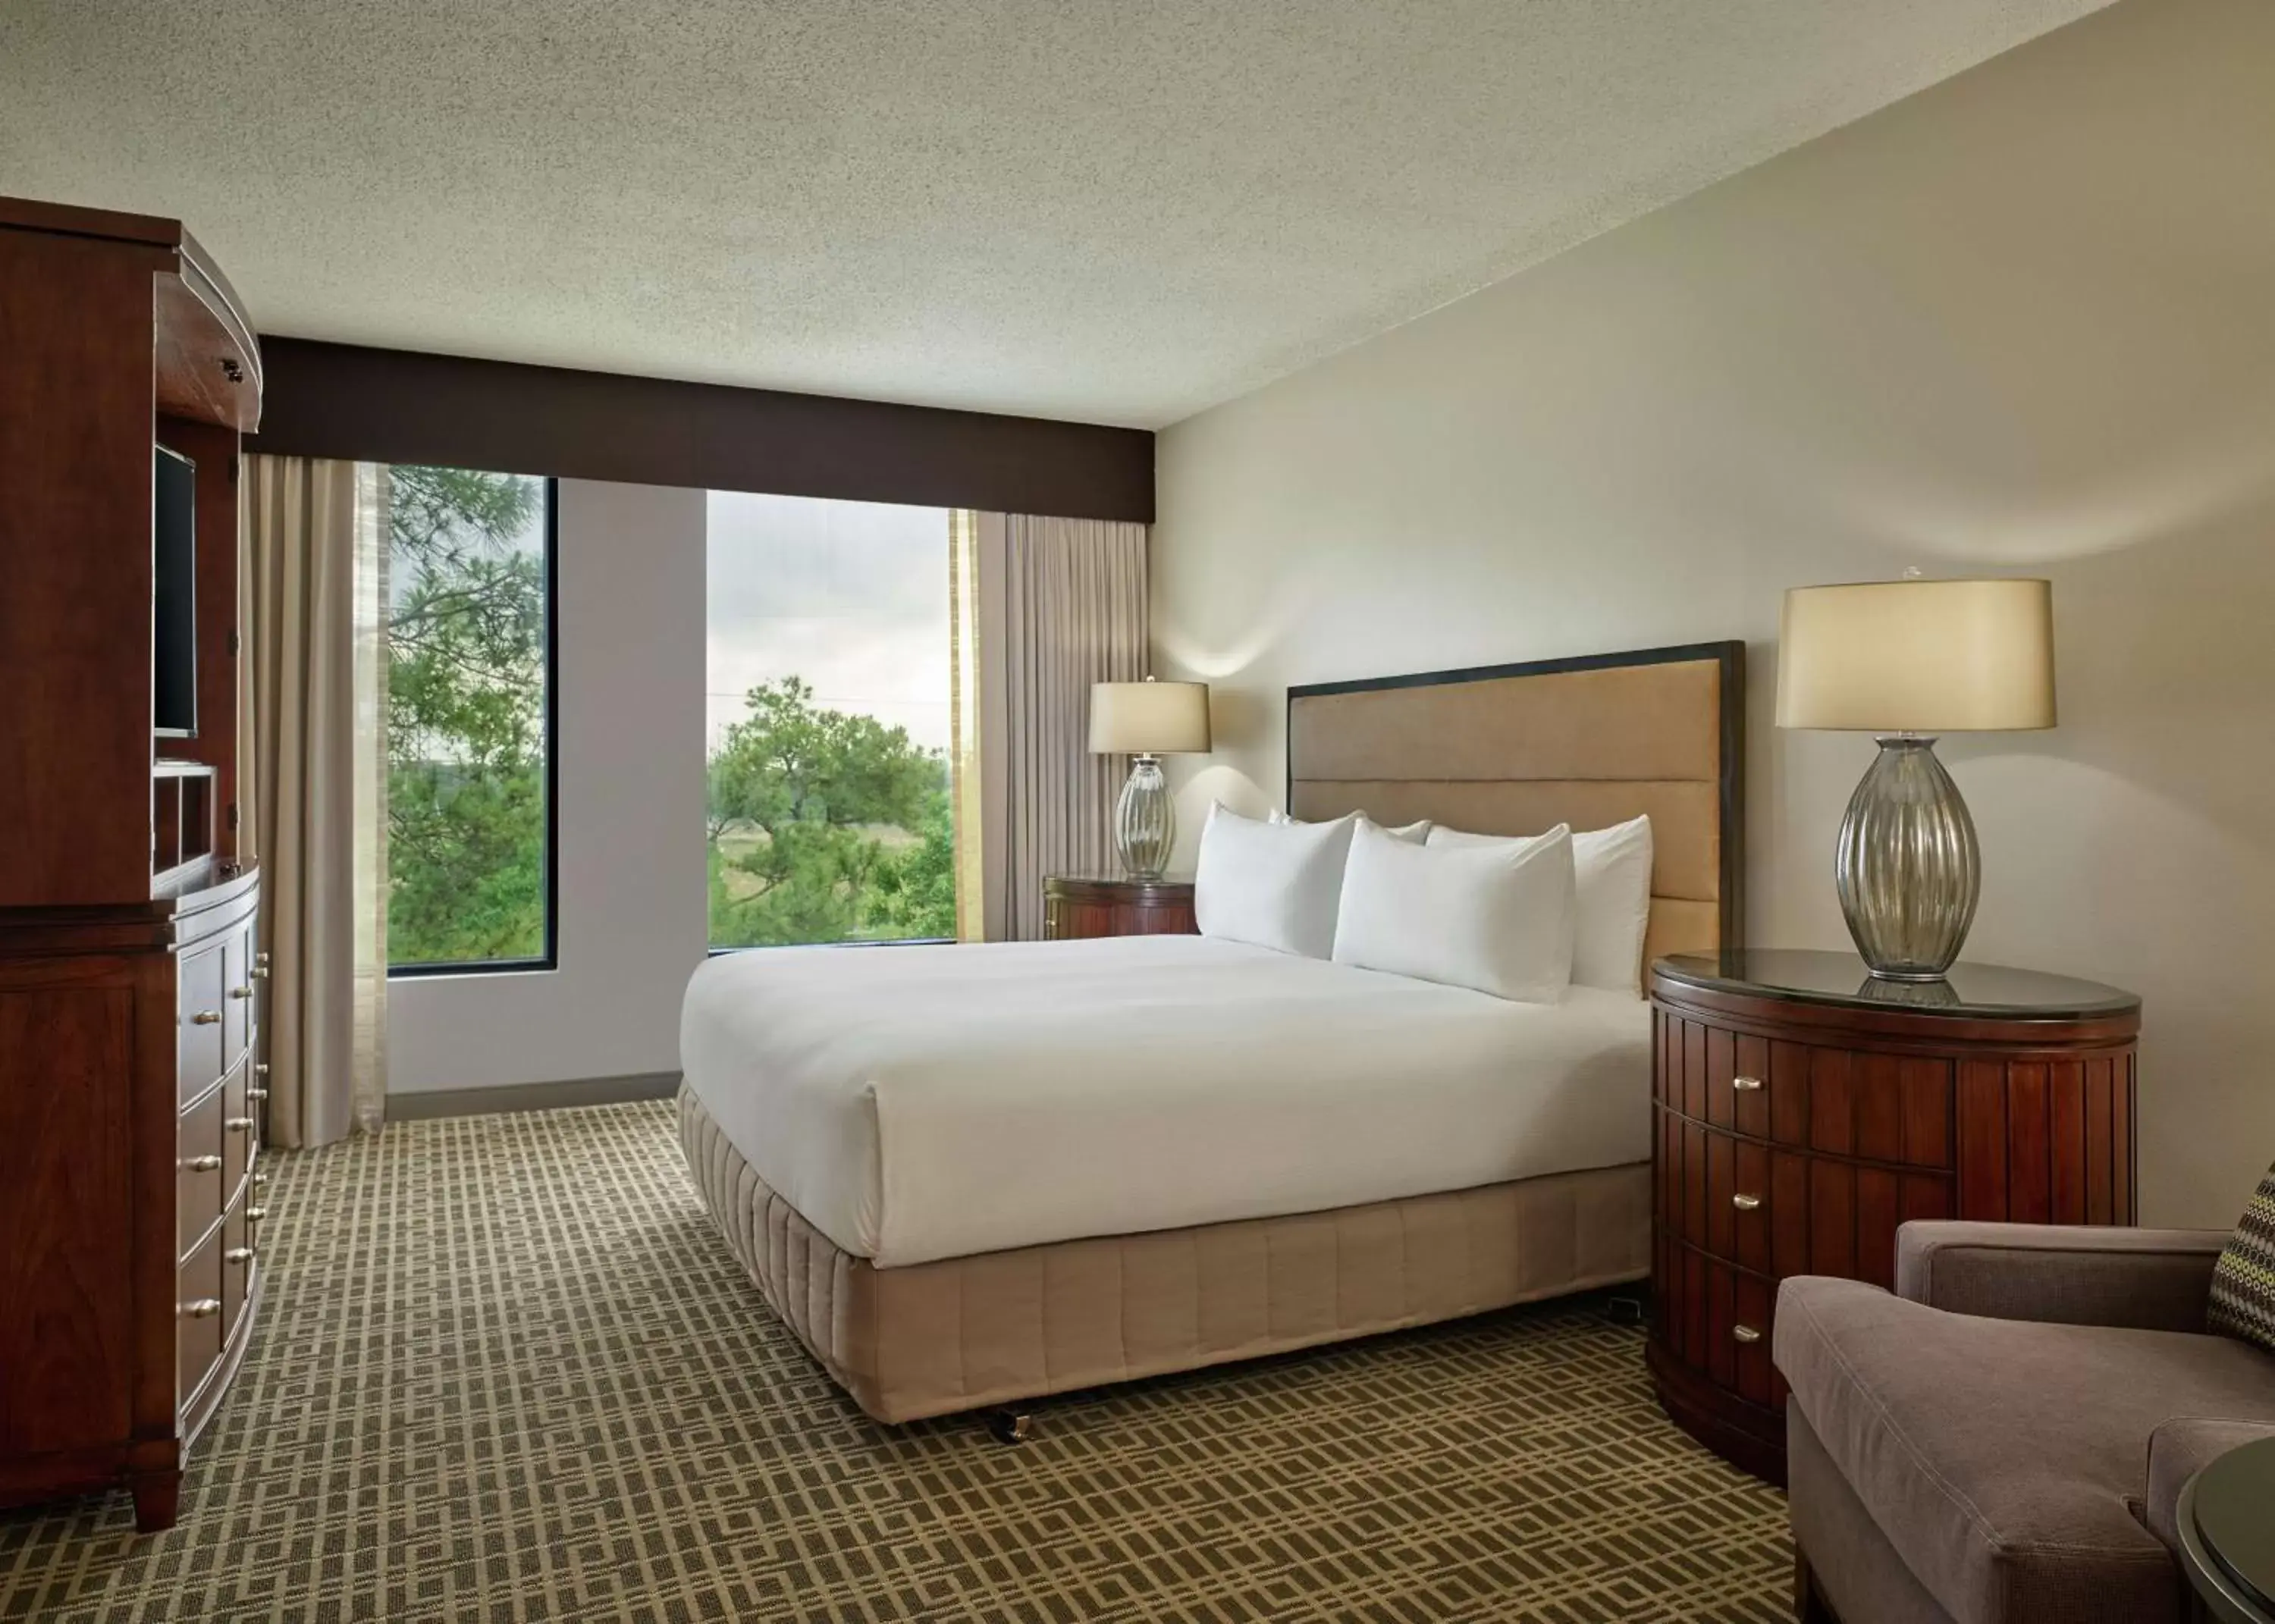 Bedroom in DoubleTree by Hilton Houston Intercontinental Airport